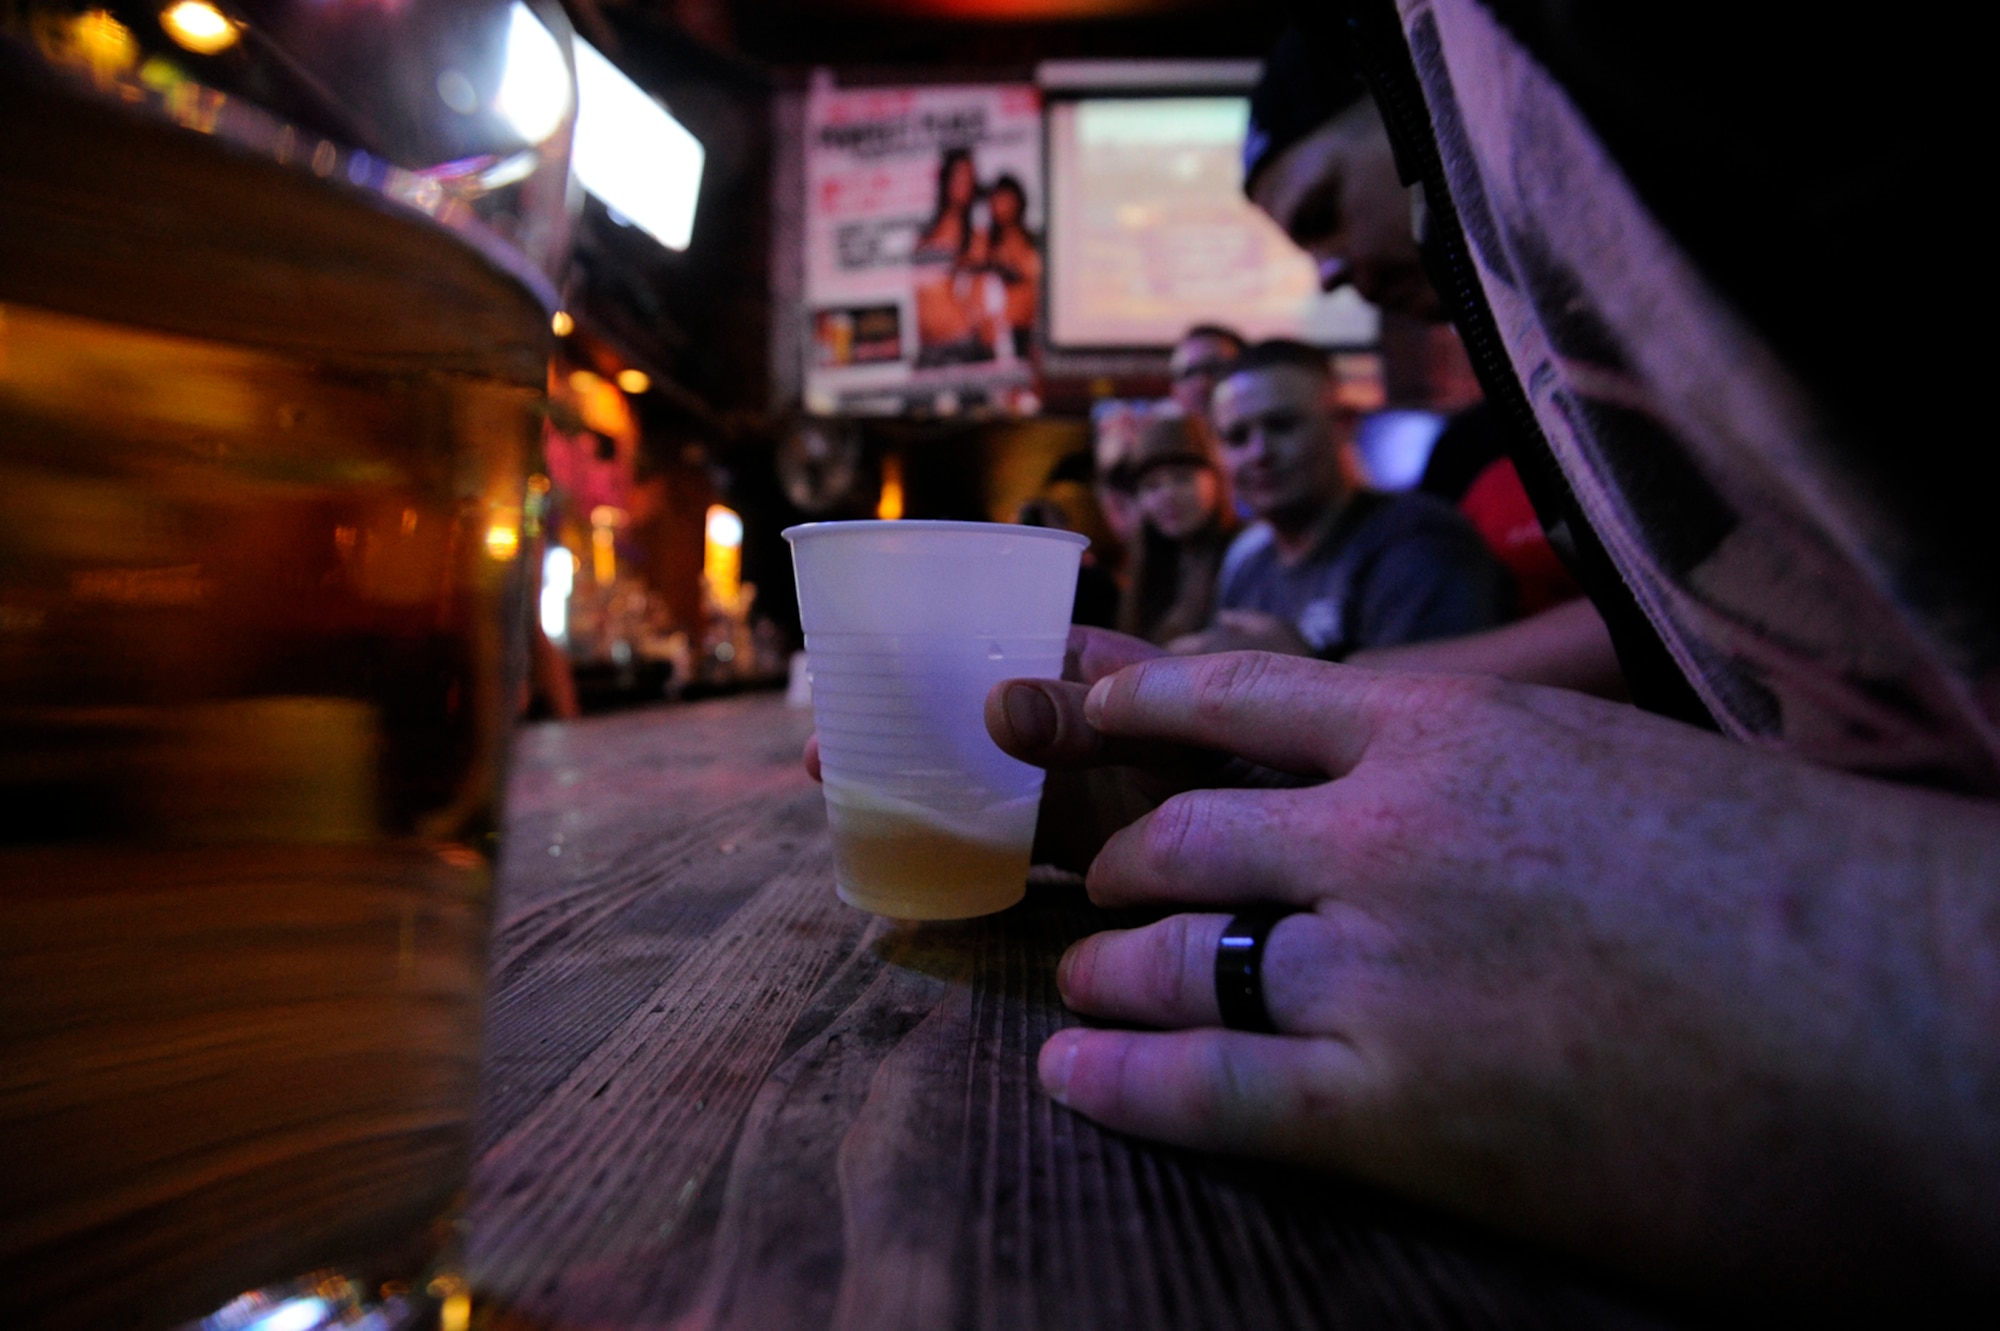 Although college students commonly binge drink, 70 percent of binge drinking episodes involve adults age 26 years and older, according to a recent national survey.  (Photo by Airman 1st Class Allen Stokes)